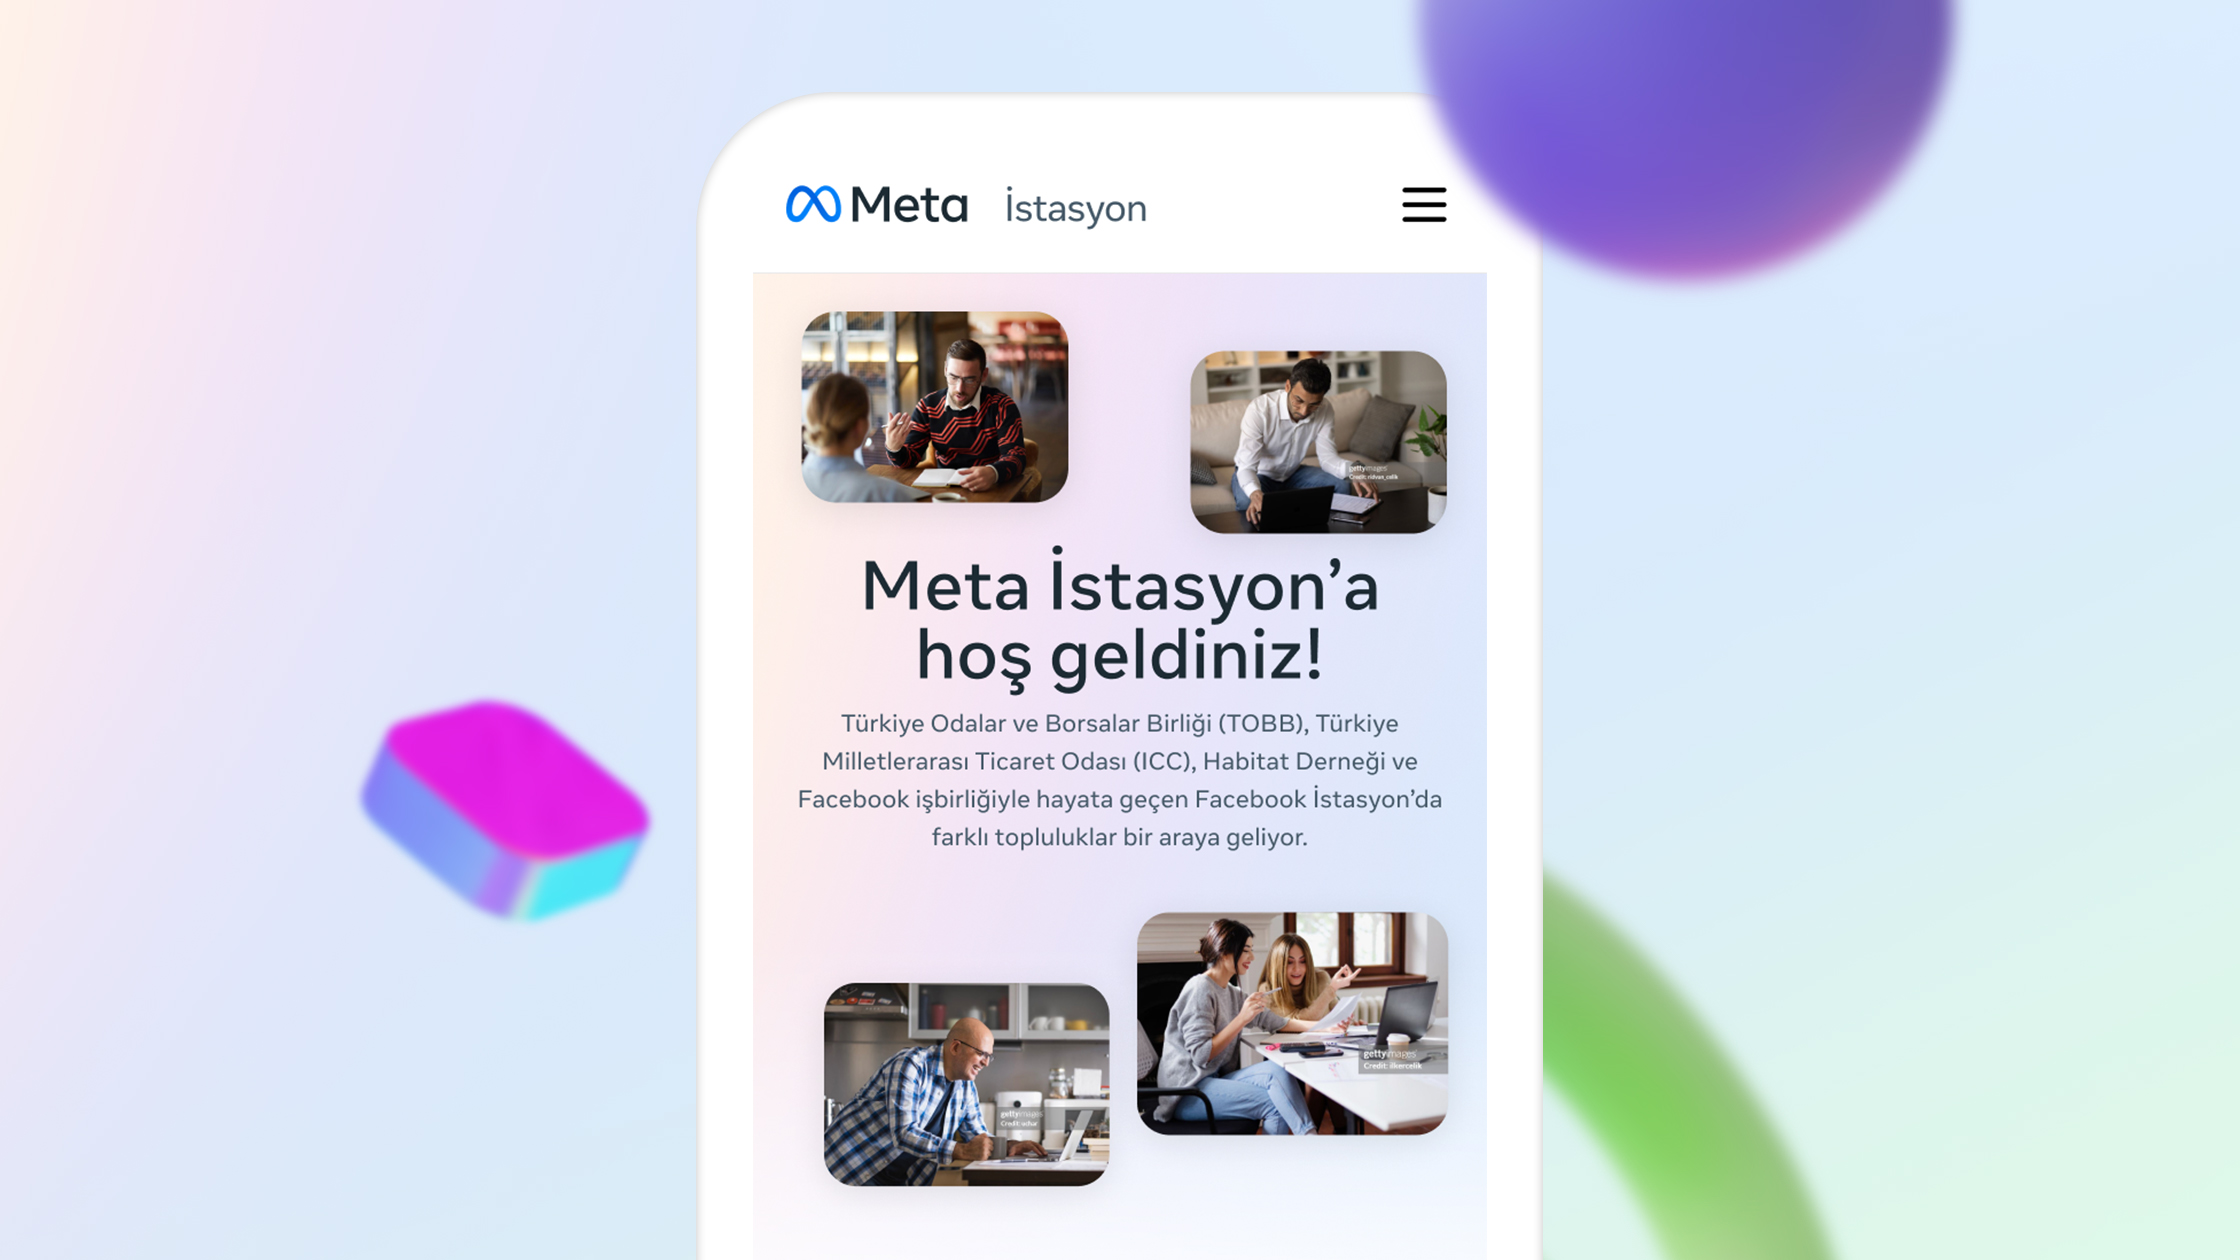 A smartphone screen displays a welcome message for "Meta İstasyon," written in Turkish. Below the text, there are photos depicting groups of people collaborating in a workspace. The background features a gradient with abstract shapes.